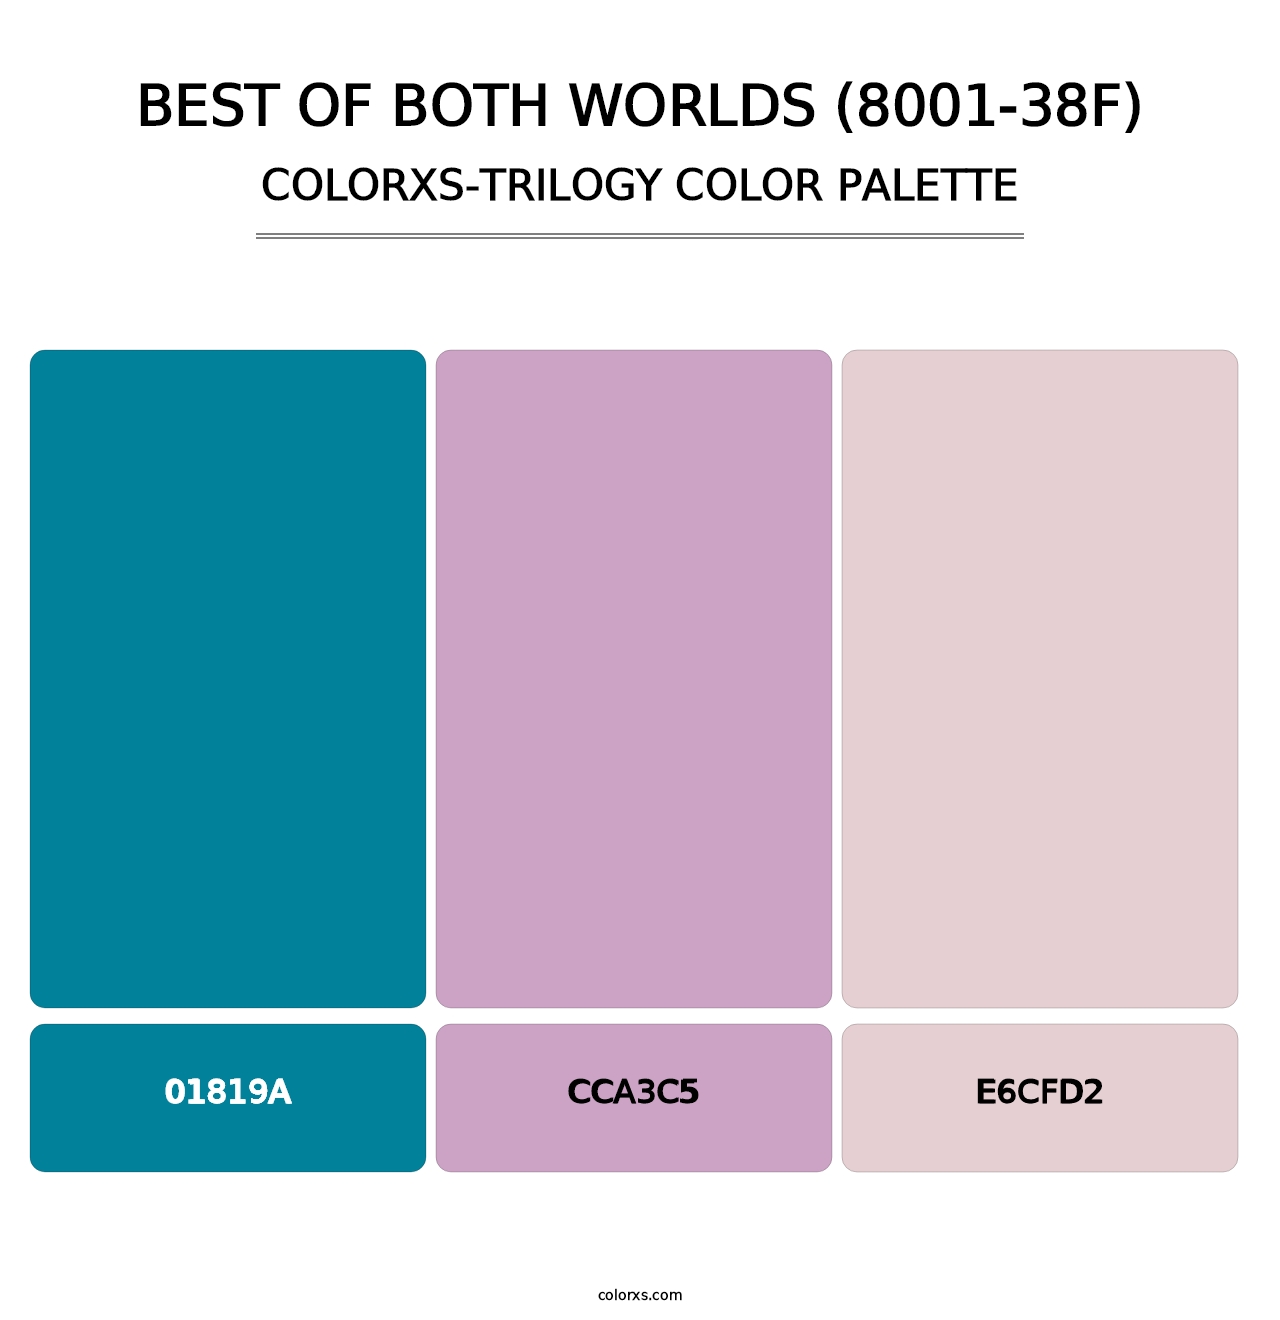 Best of Both Worlds (8001-38F) - Colorxs Trilogy Palette